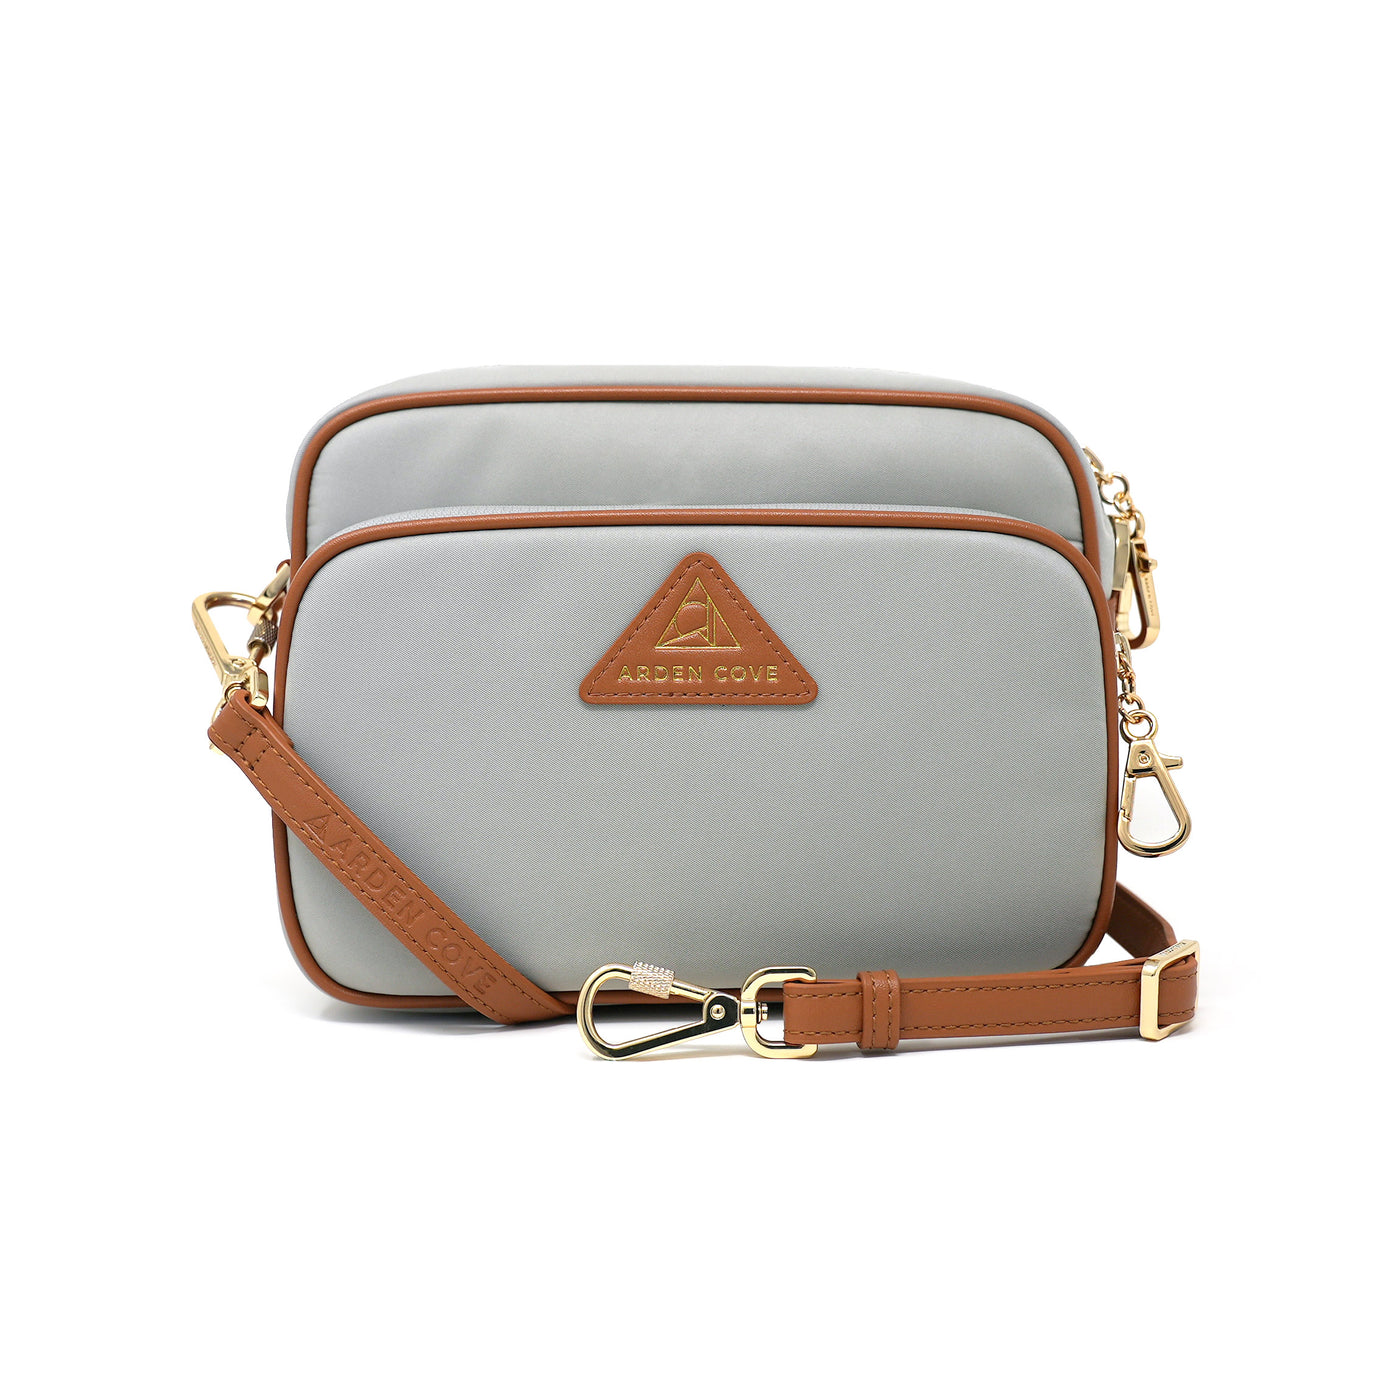 Anti-theft Water-resistant Travel Crossbody - Crissy Full Crossbody in Light Grey Gold with slash-resistant faux leather locking clasps straps - front view - Arden Cove